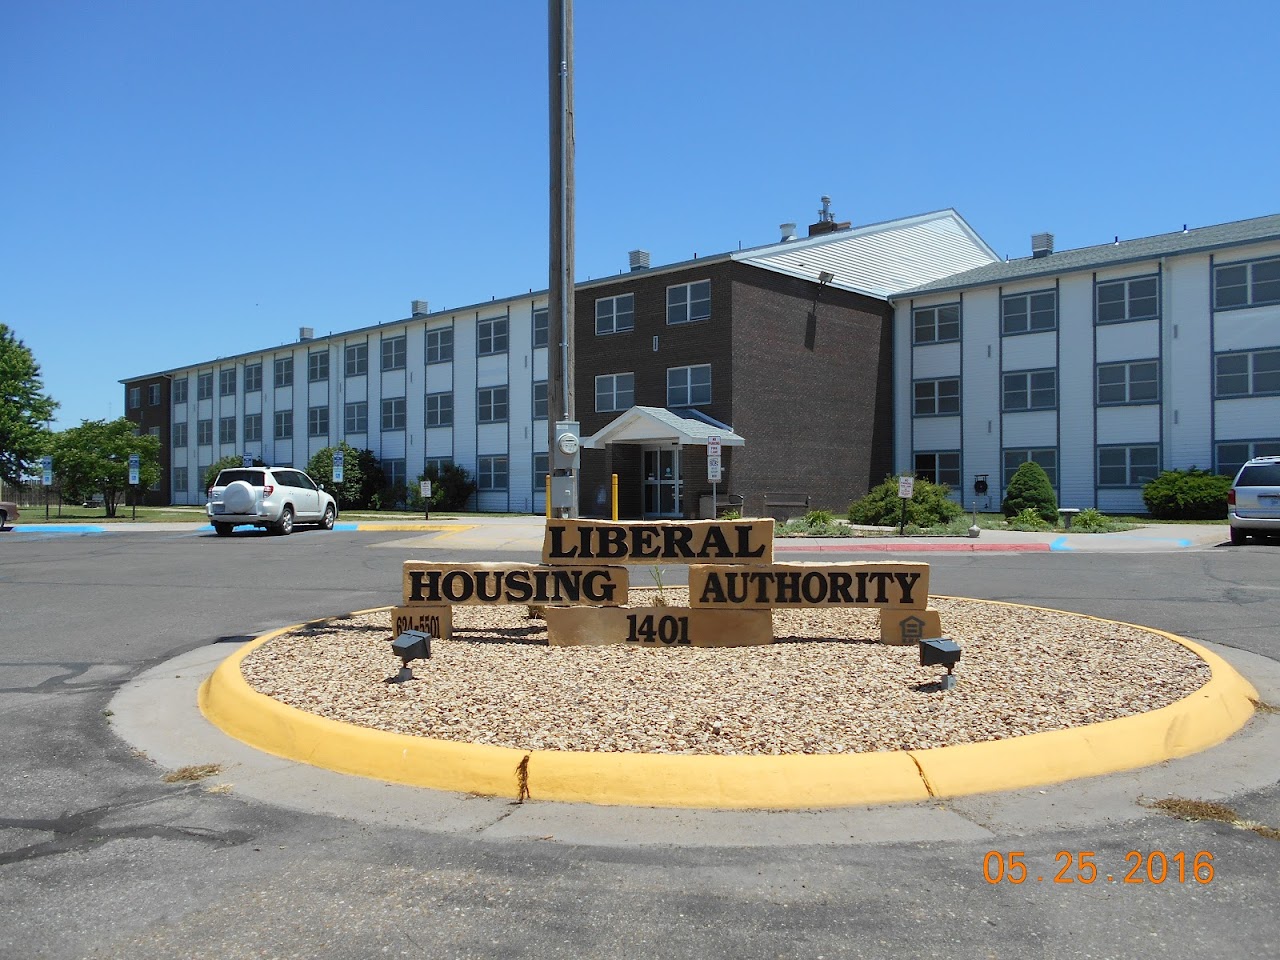 Photo of Liberal Housing Authority at 1401 N NEW YORK Avenue LIBERAL, KS 67901